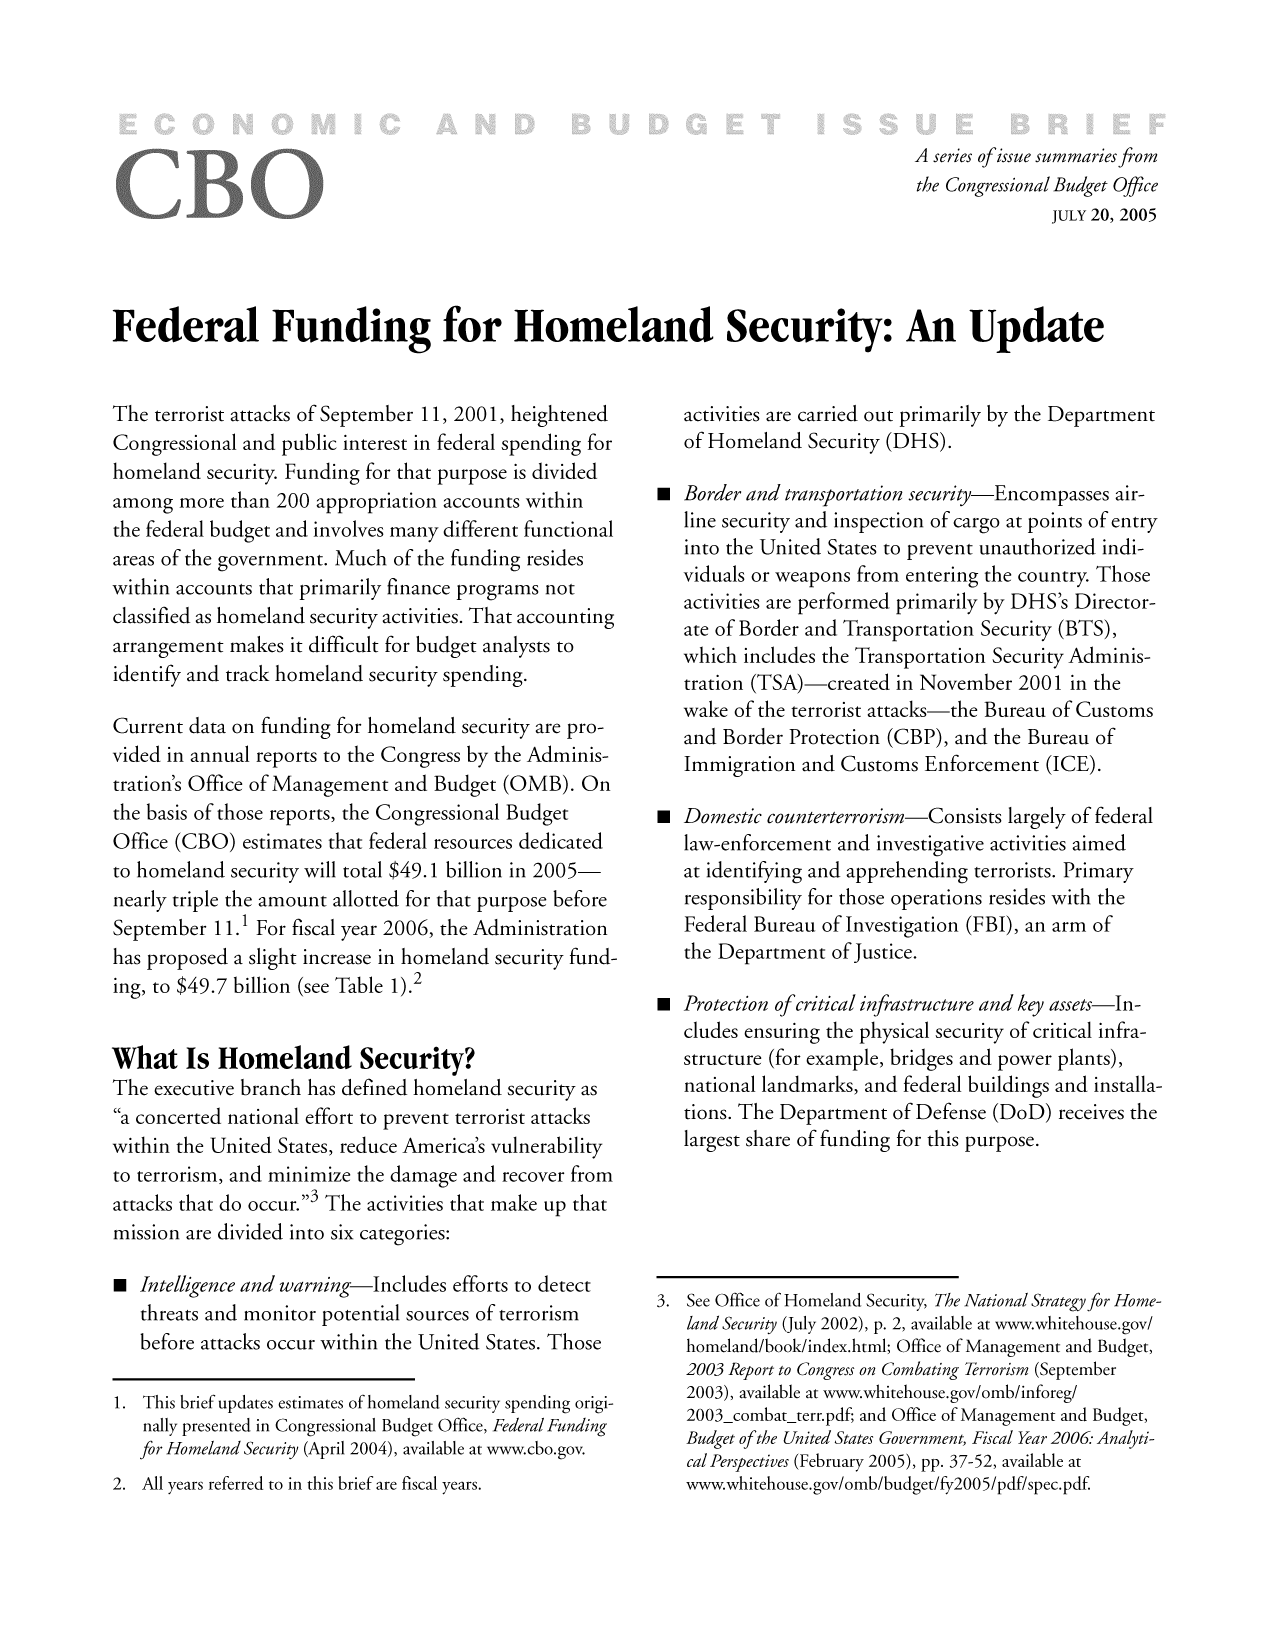 handle is hein.congrec/cbo8317 and id is 1 raw text is: A series of issue summaries from
the Congressional Budget Office
JULY 20, 2005
Federal Funding for Homeland Security: An Update

The terrorist attacks of September 11, 200 1, heightened
Congressional and public interest in federal spending for
homeland security. Funding for that purpose is divided
among more than 200 appropriation accounts within
the federal budget and involves many different functional
areas of the government. Much of the funding resides
within accounts that primarily finance programs not
classified as homeland security activities. That accounting
arrangement makes it difficult for budget analysts to
identify and track homeland security spending.
Current data on funding for homeland security are pro-
vided in annual reports to the Congress by the Adminis-
tration's Office of Management and Budget (0MB). On
the basis of those reports, the Congressional Budget
Office (CBO) estimates that federal resources dedicated
to homeland security will total $49.1 billion in 2005
nearly triple the amount allotted for that purpose before
September 11. 1 For fiscal year 2006, the Administration
has proposed a slight increase in homeland security fund-
ing, to $49.7 billion (see Table 1).2
What Is Homeland Security?
The executive branch has defined homeland security as
ca concerted national effort to prevent terrorist attacks
within the United States, reduce America's vulnerability
to terrorism, and minimize the damage and recover from
attacks that do occur.3 The activities that make up that
mission are divided into six categories:
0 Intelligence and warning-Includes efforts to detect
threats and monitor potential sources of terrorism
before attacks occur within the United States. Those
1  This brief updates estimates of homeland security spending origi-
nally presented in Congressional Budget Office, Federal Funding
for Homeland Security (April 2004), available at www.cbo.gov.
2. All years referred to in this brief are fiscal years.

activities are carried out primarily by the Department
of Homeland Security (DHS).
0 Border and transportation security-Encompasses air-
line security and inspection of cargo at points of entry
into the United States to prevent unauthorized indi-
viduals or weapons from entering the country. Those
activities are performed primarily by DHS's Director-
ate of Border and Transportation Security (BTS),
which includes the Transportation Security Adminis-
tration (TSA)-created in November 2001 in the
wake of the terrorist attacks-the Bureau of Customs
and Border Protection (CBP), and the Bureau of
Immigration and Customs Enforcement (ICE).
0 Domestic counterterrorism-Consists largely of federal
law-enforcement and investigative activities aimed
at identifying and apprehending terrorists. Primary
responsibility fur those operationls resides with tihe
Federal Bureau of Investigation (FBI), an arm of
the Department of justice.
0 Protection of critical infrastructure and key assets-In-
cludes ensuring the physical security of critical infra-
structure (for example, bridges and power plants),
national landmarks, and federal buildings and installa-
tions. The Department of Defense (DoD) receives the
largest share of funding for this purpose.

3. See Office of Homeland Security, The National Strategy for Home-
land Security (July 2002), p. 2, available at www.whitehouse.gov/
homeland/book/index.html; Office of Management and Budget,
2003 Report to Congress on Combating Terrorism (September
2003), available at www.whitehouse.gov/omb/inforeg/
2003 combat-terr.pdf; and Office of Management and Budget,
Budget of the United States Government, Fiscal Year 2006- Analyti-
cal Perspectives (Eebruary 2005), pp. 37-52, available at
www.whitehouse.gov/omb/budget/fy2005/pdf/spec.pdf.


